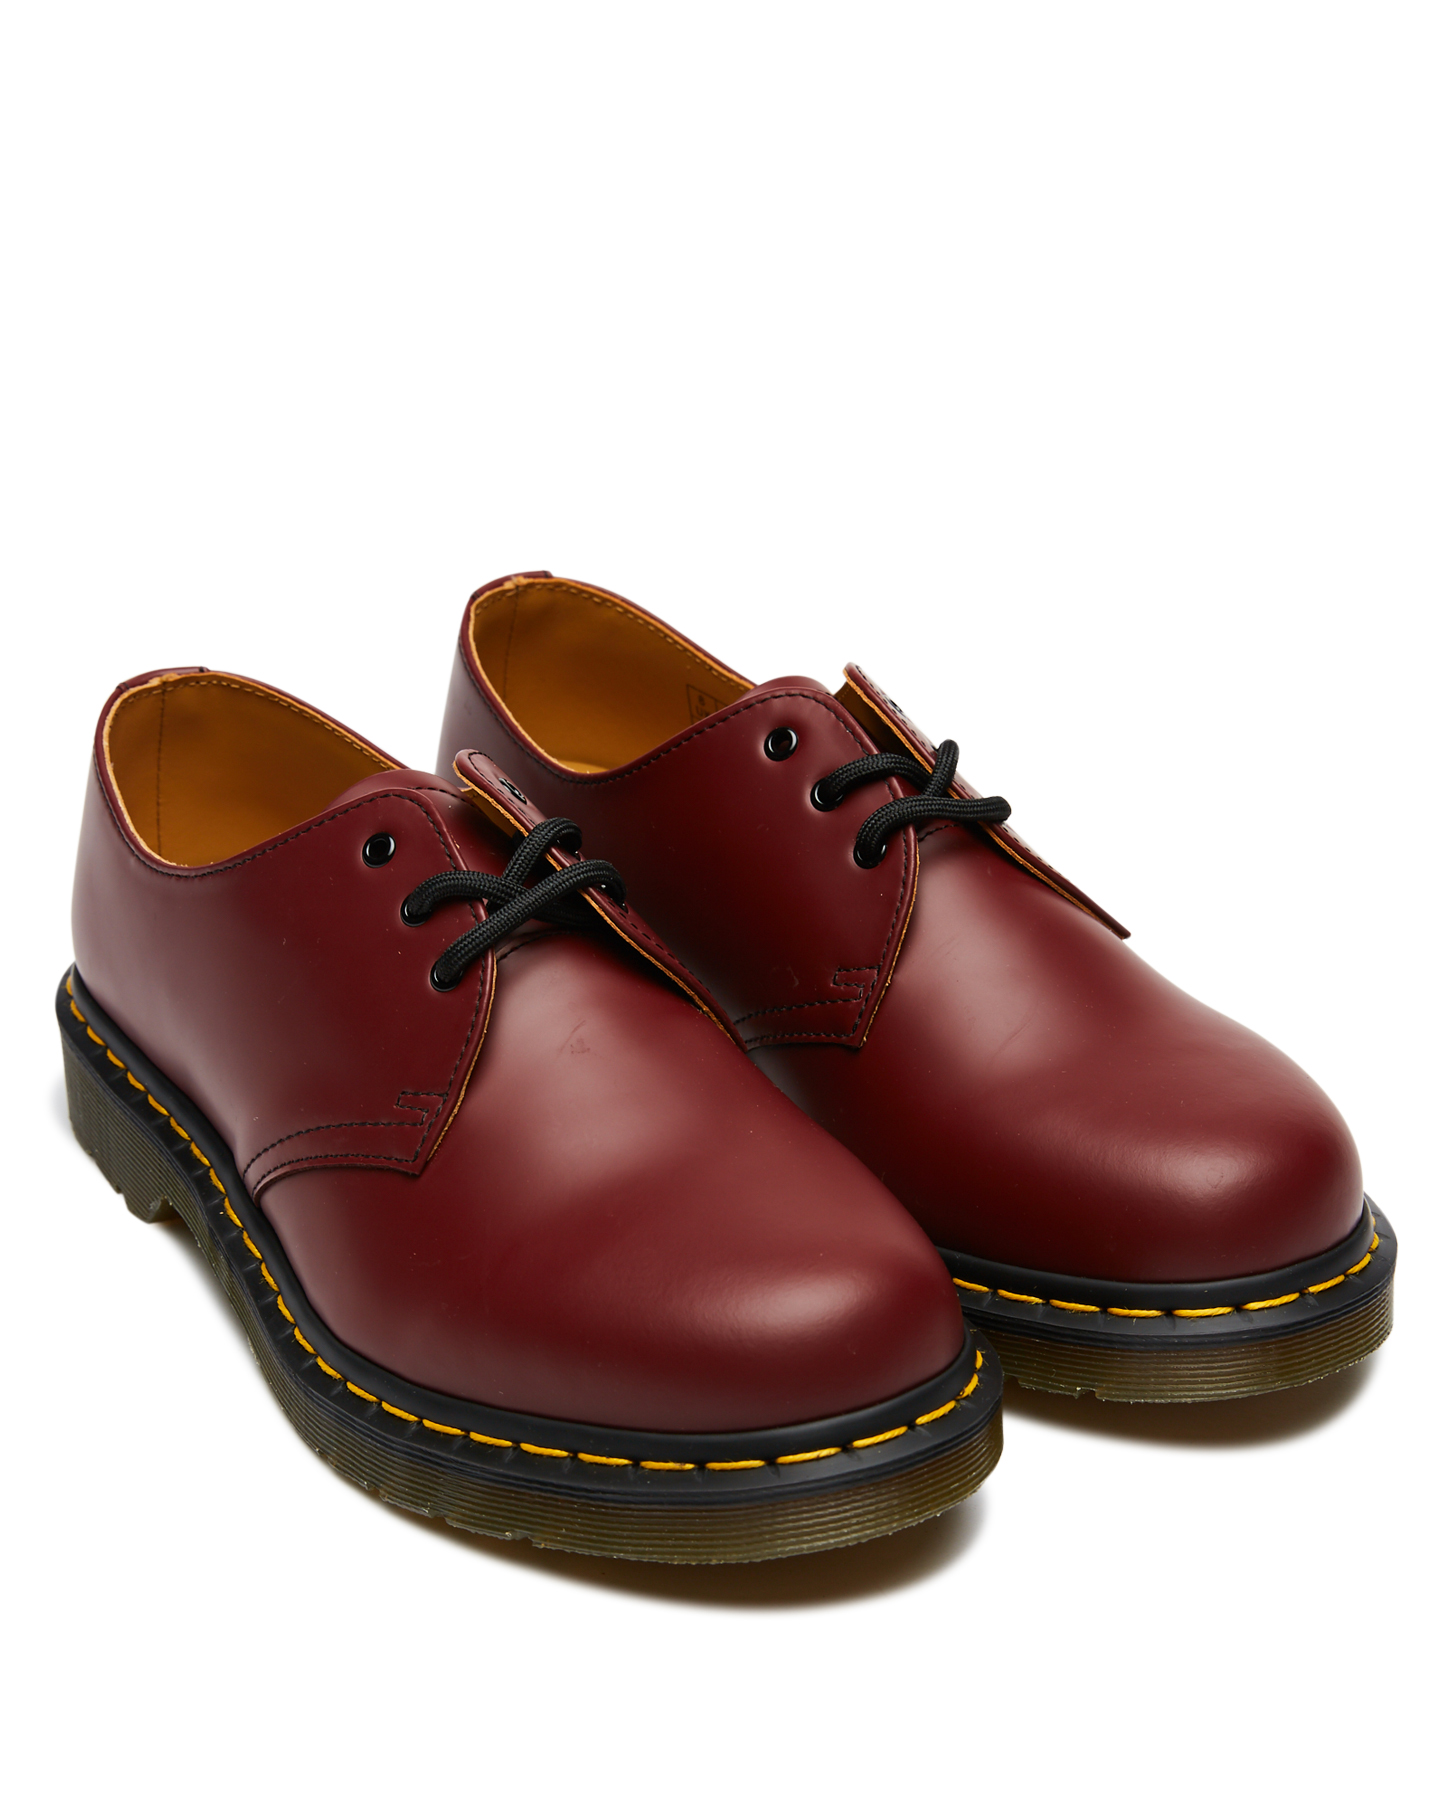 Dr Martens Womens Classic 1461 3 Eye Gibson Shoe Cherry Red Smooth Surfstitch 